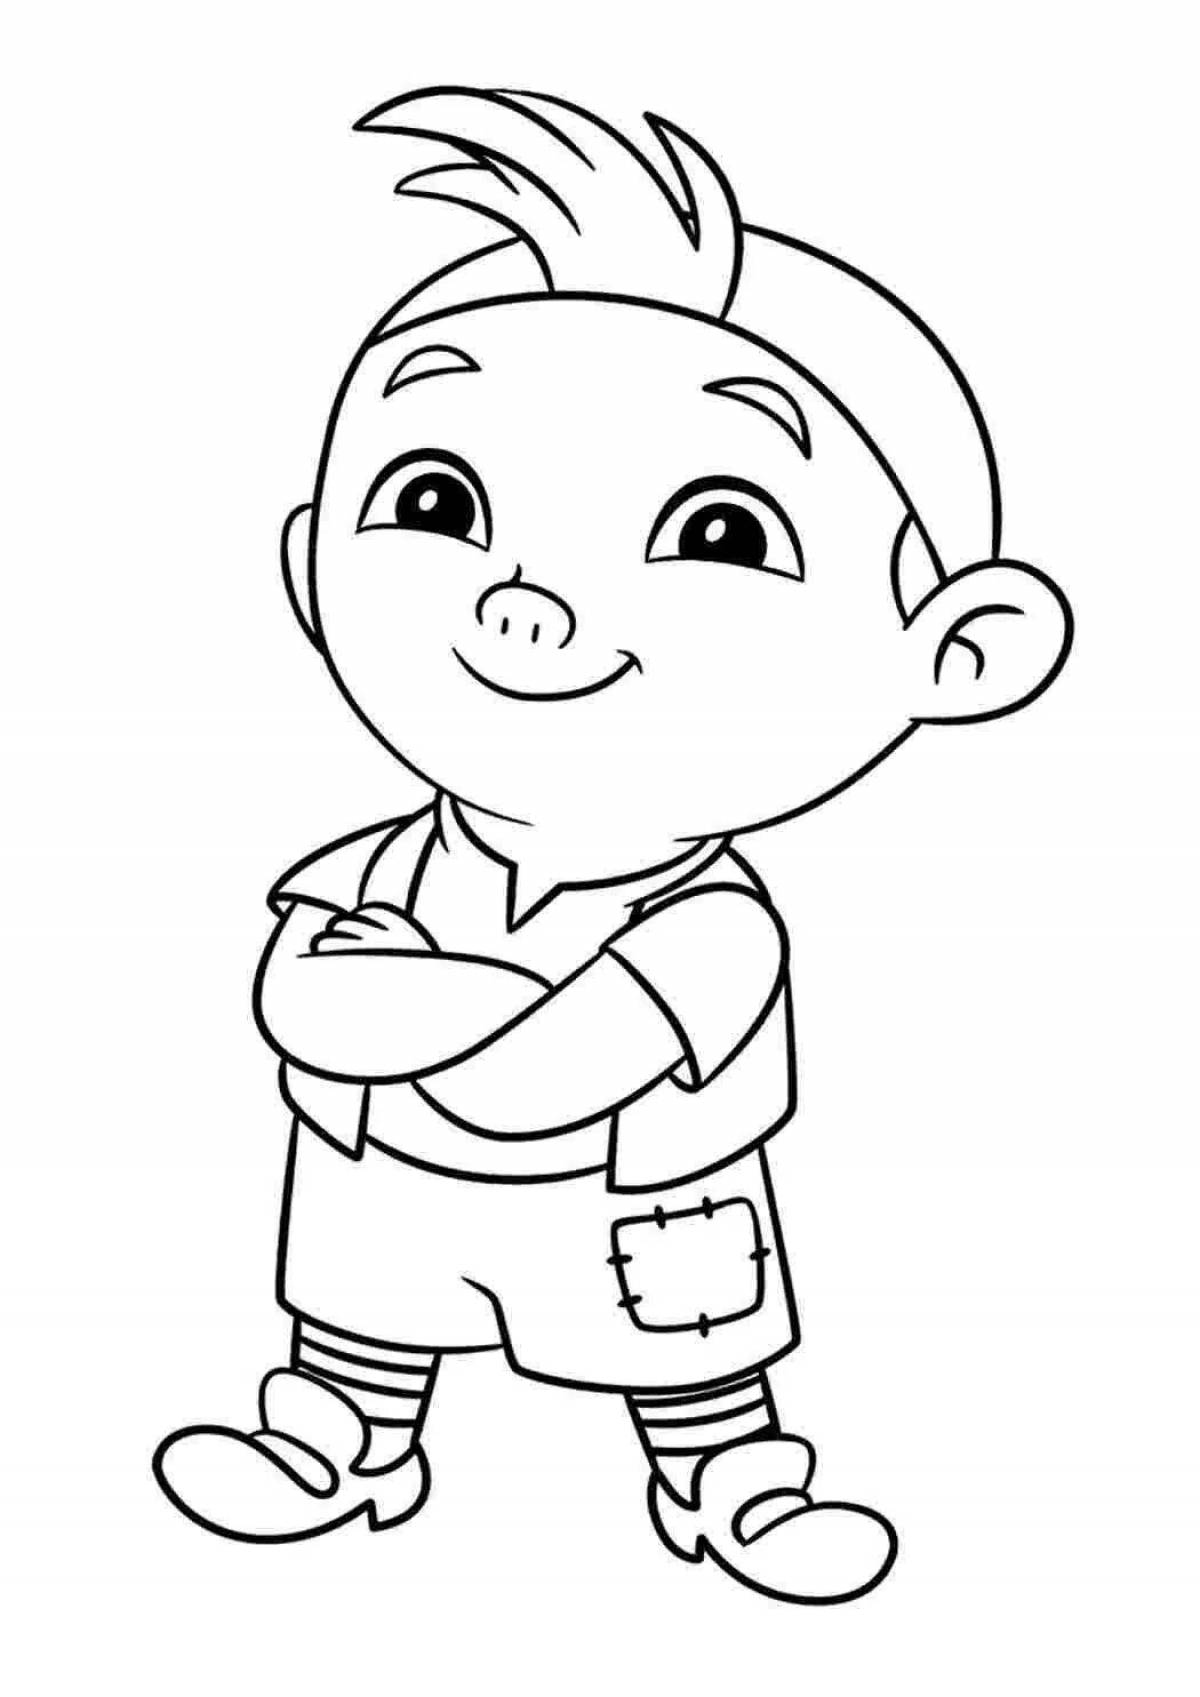 Playful coloring bw for kids